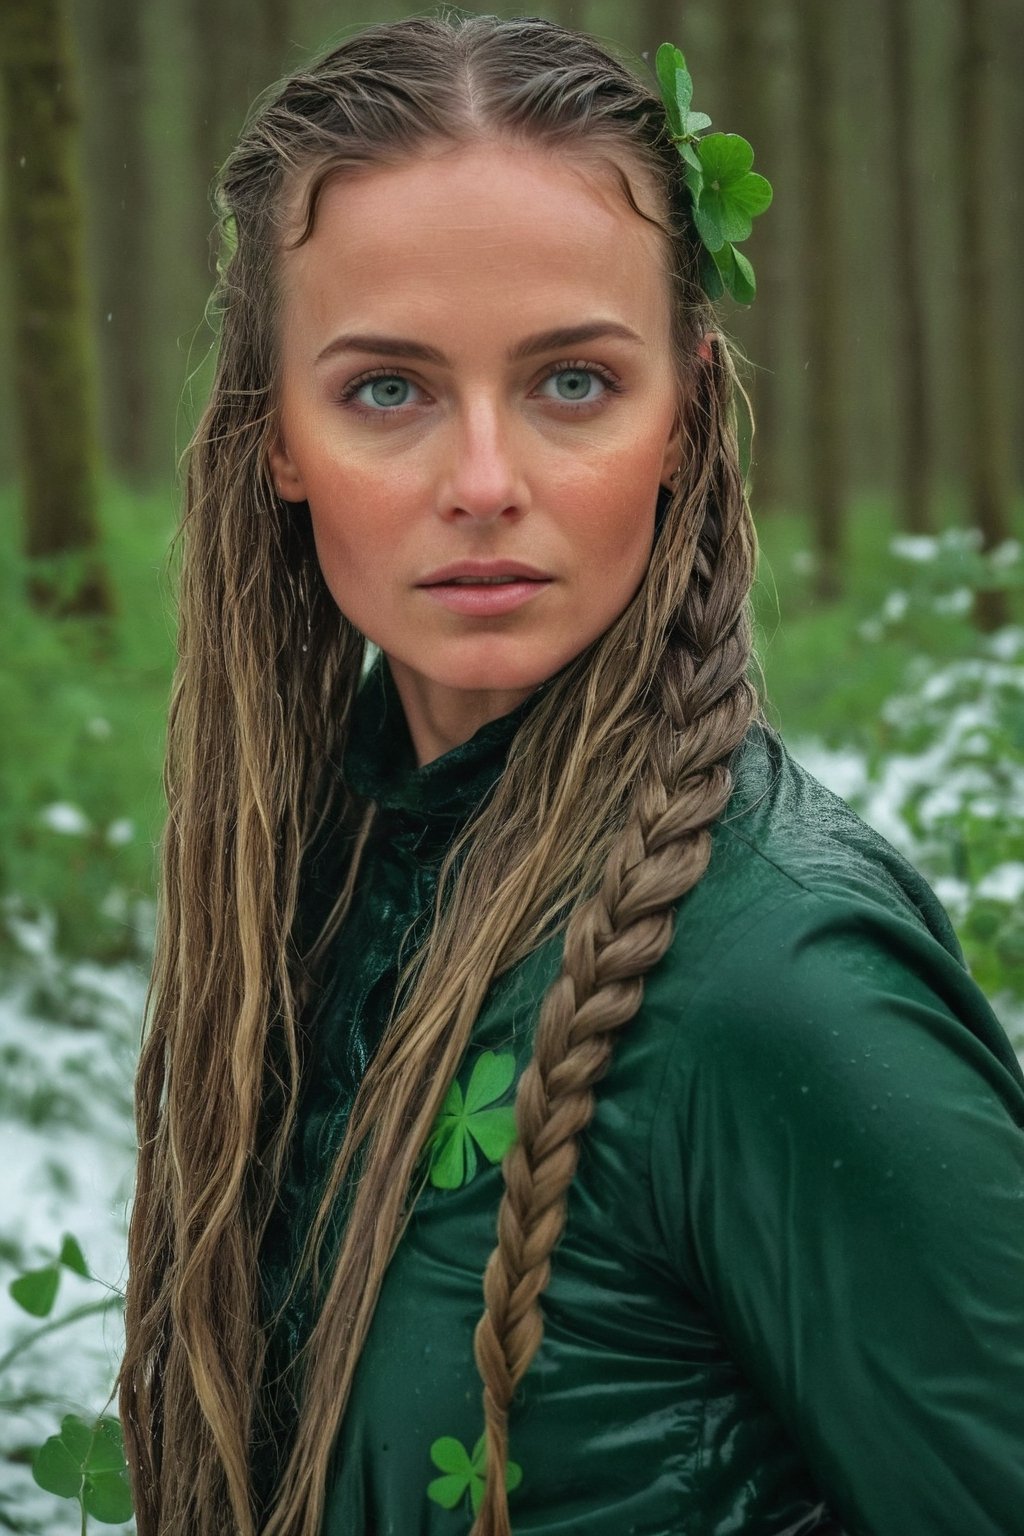 35 year old wet female leprechaun in a lush snowy forest at sunrise, long flowing wet braided hair, warmth, determination, poise, eyes glimmering with warm hues, wet clothes adorned with a geometric four leaf clover pattern, perfect eyes, perfect anatomy, artistic composition, masterpiece quality, high-detail, realistic skin texture, captured with Sony A7R IV, Sony FE 50mm f/1.2 GM lens, bathed in warm natural light, ultra-realistic,soakingwetclothes